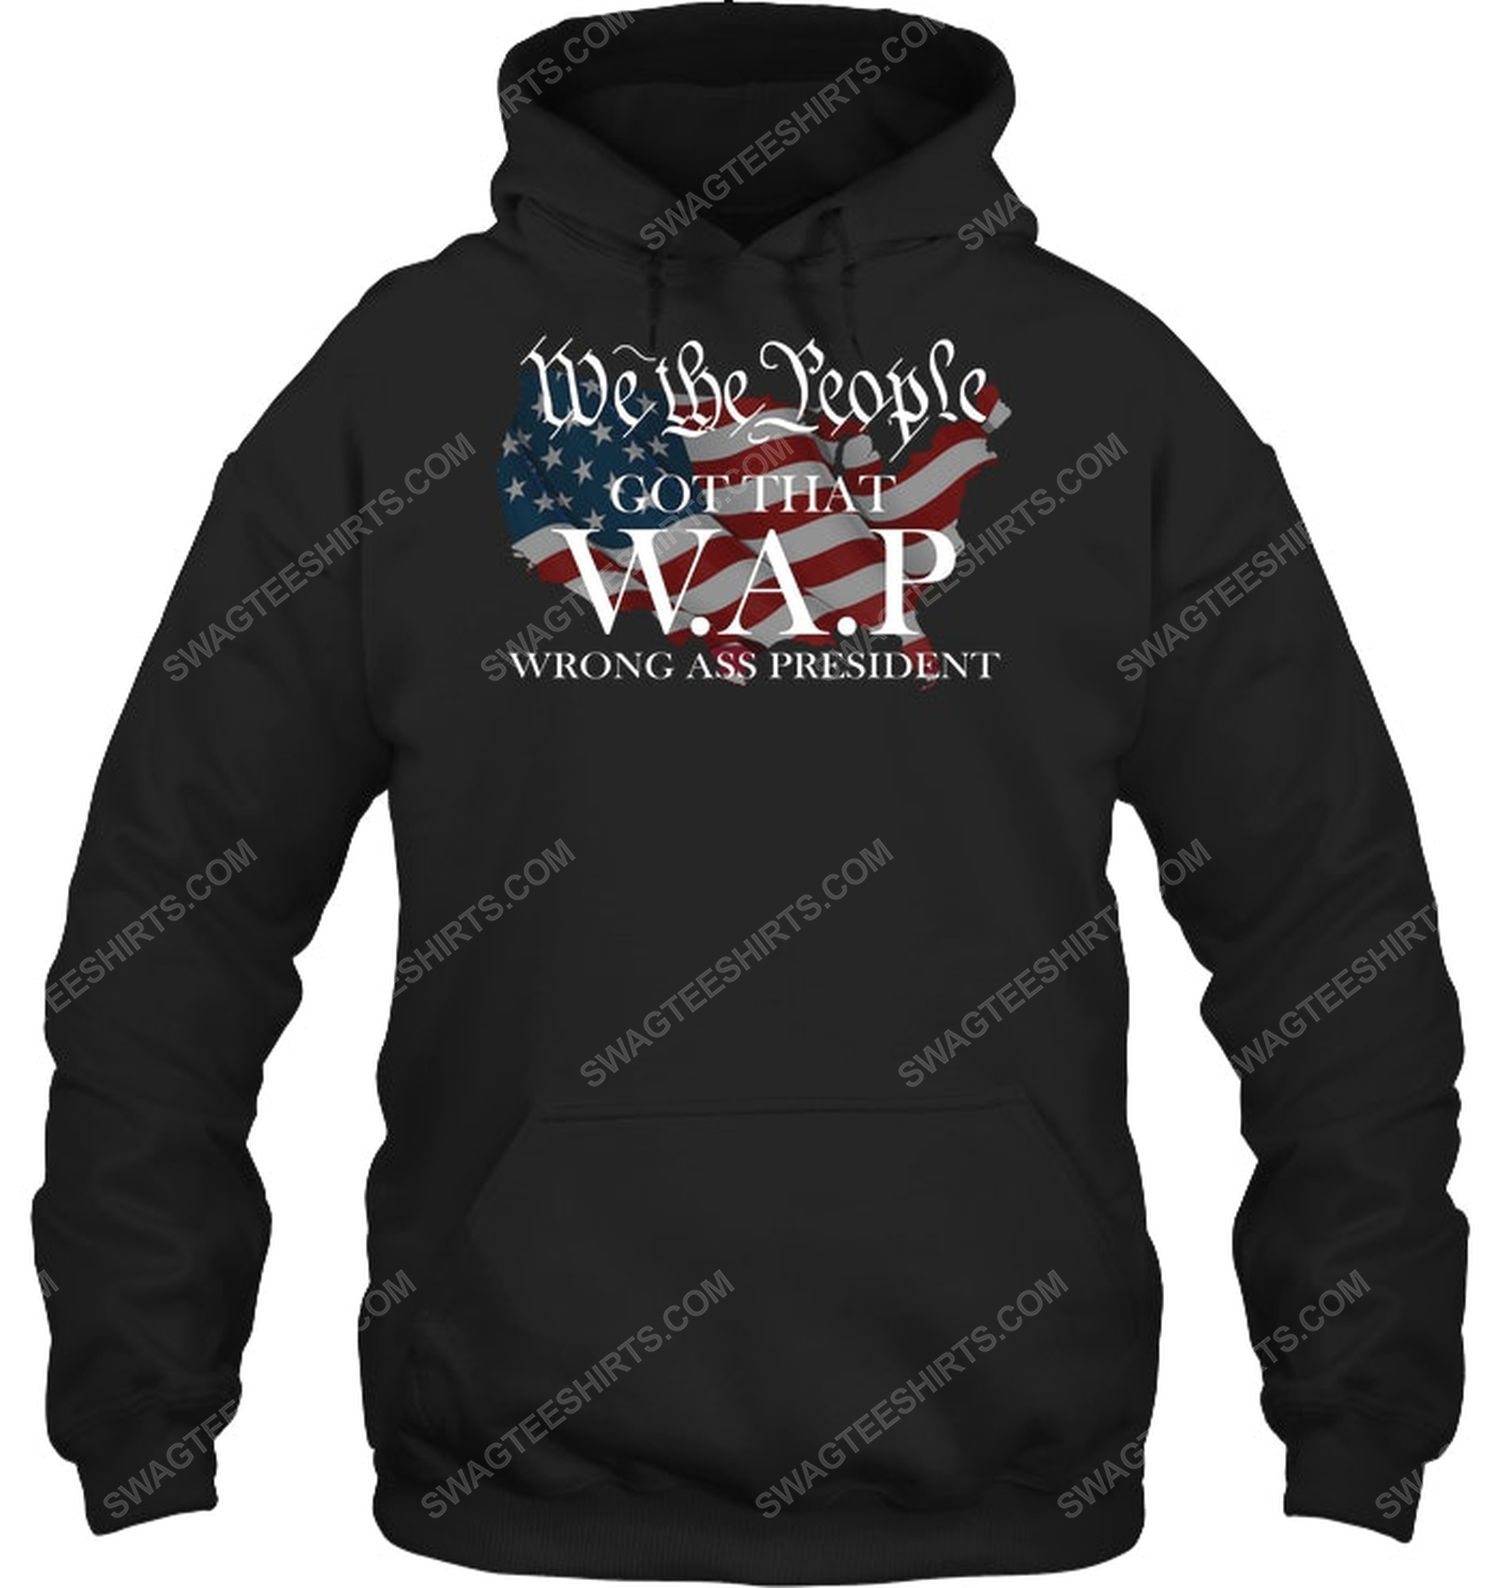 American flag we the people got that wap wrong ass president political hoodie